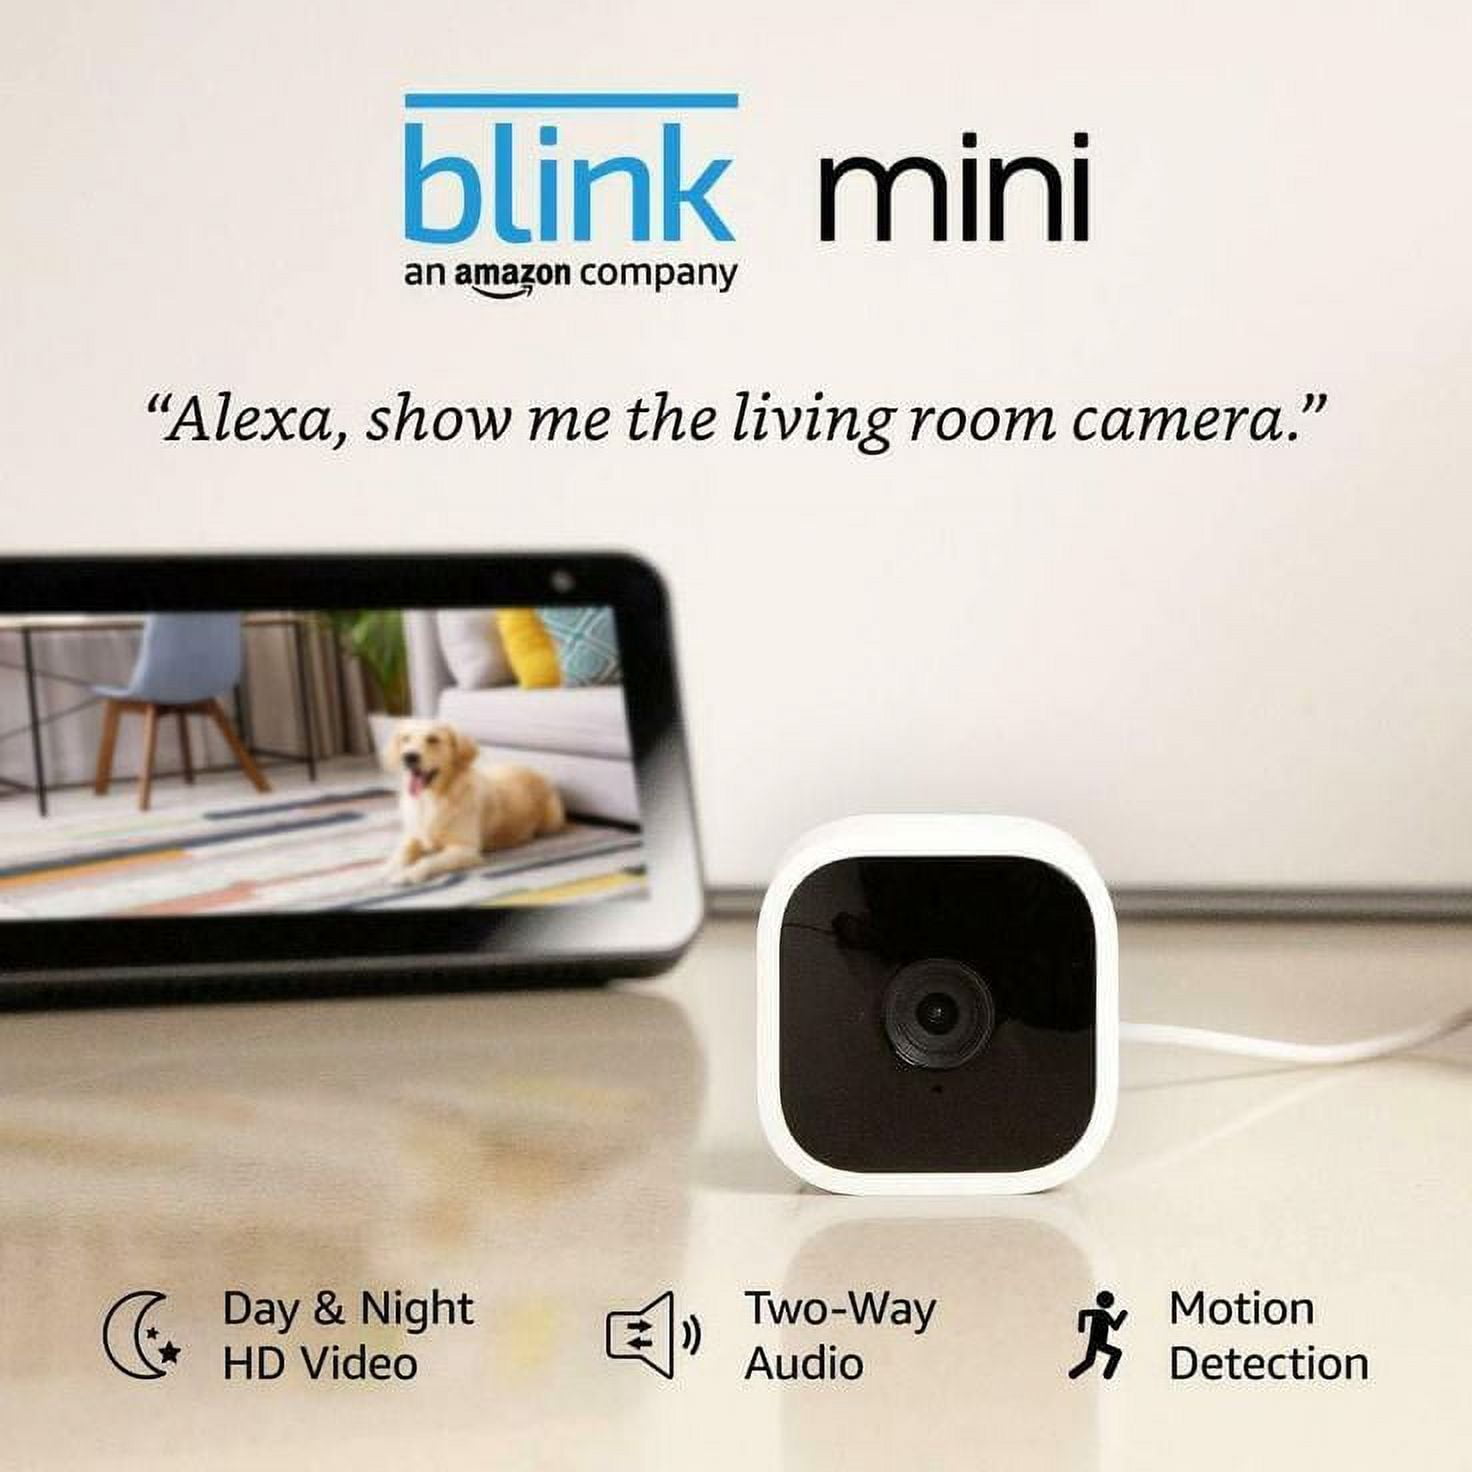  Blink Mini – Compact indoor plug-in smart security camera,  1080p HD video, night vision, motion detection, two-way audio, easy set up,  Works with Alexa – 4 cameras (White)